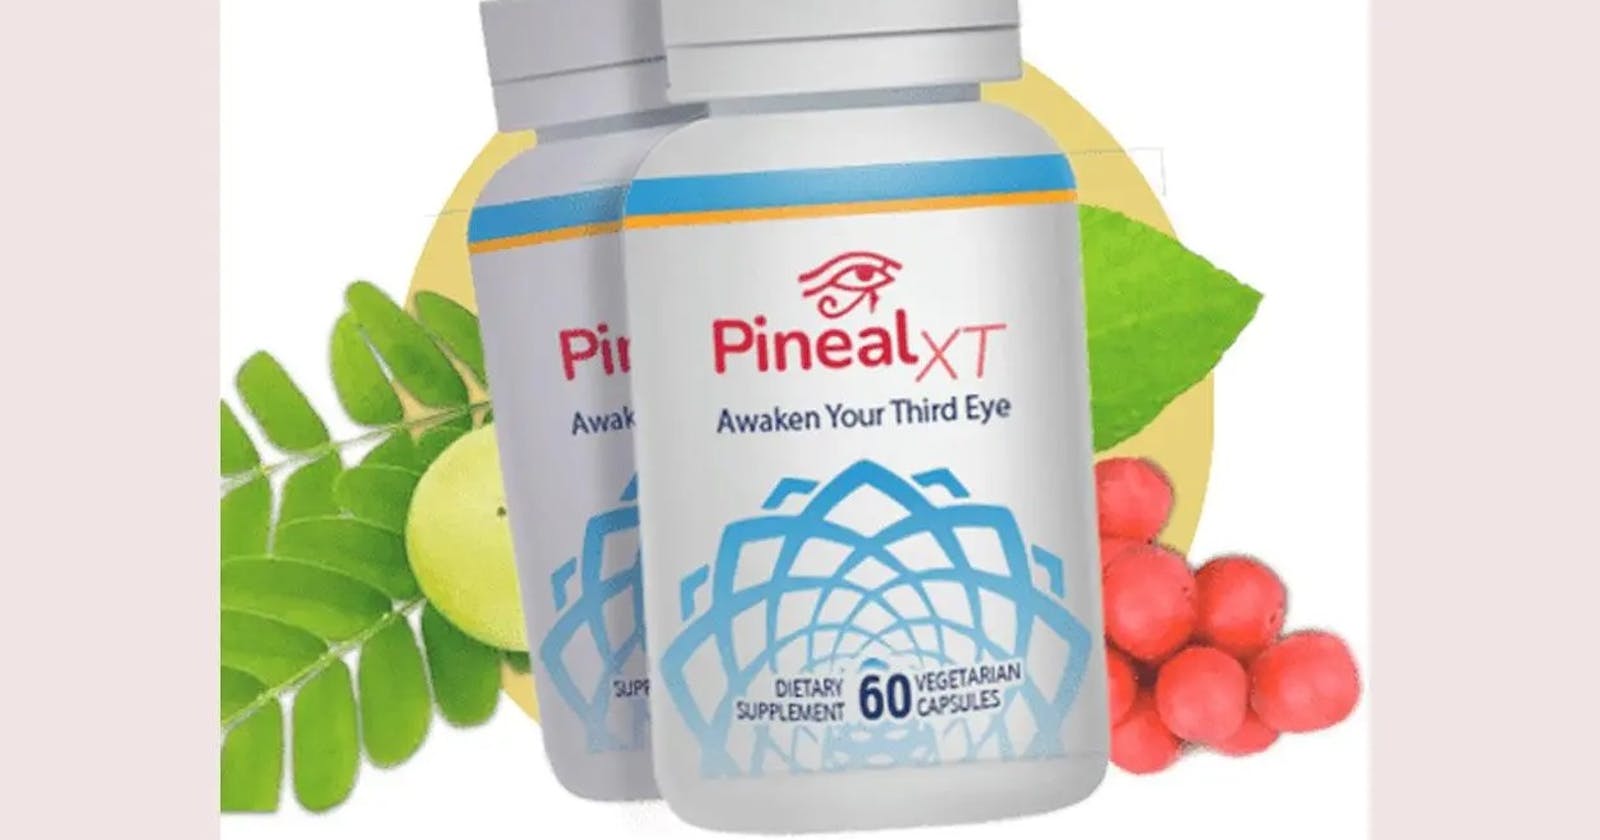 Pineal XT Transform Your Life with Unleash Your True Potential!